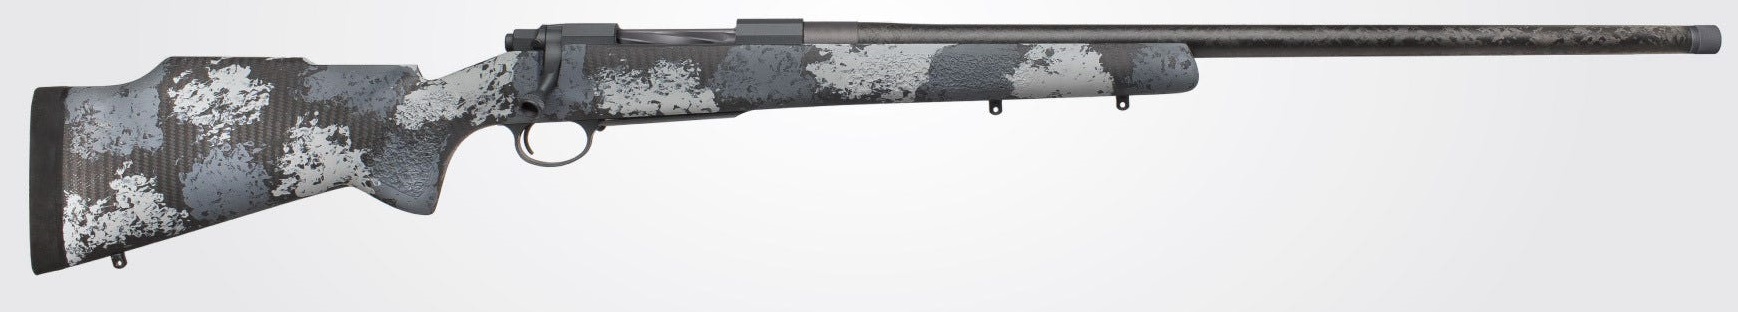 A rifle chambered for 28 Nosler